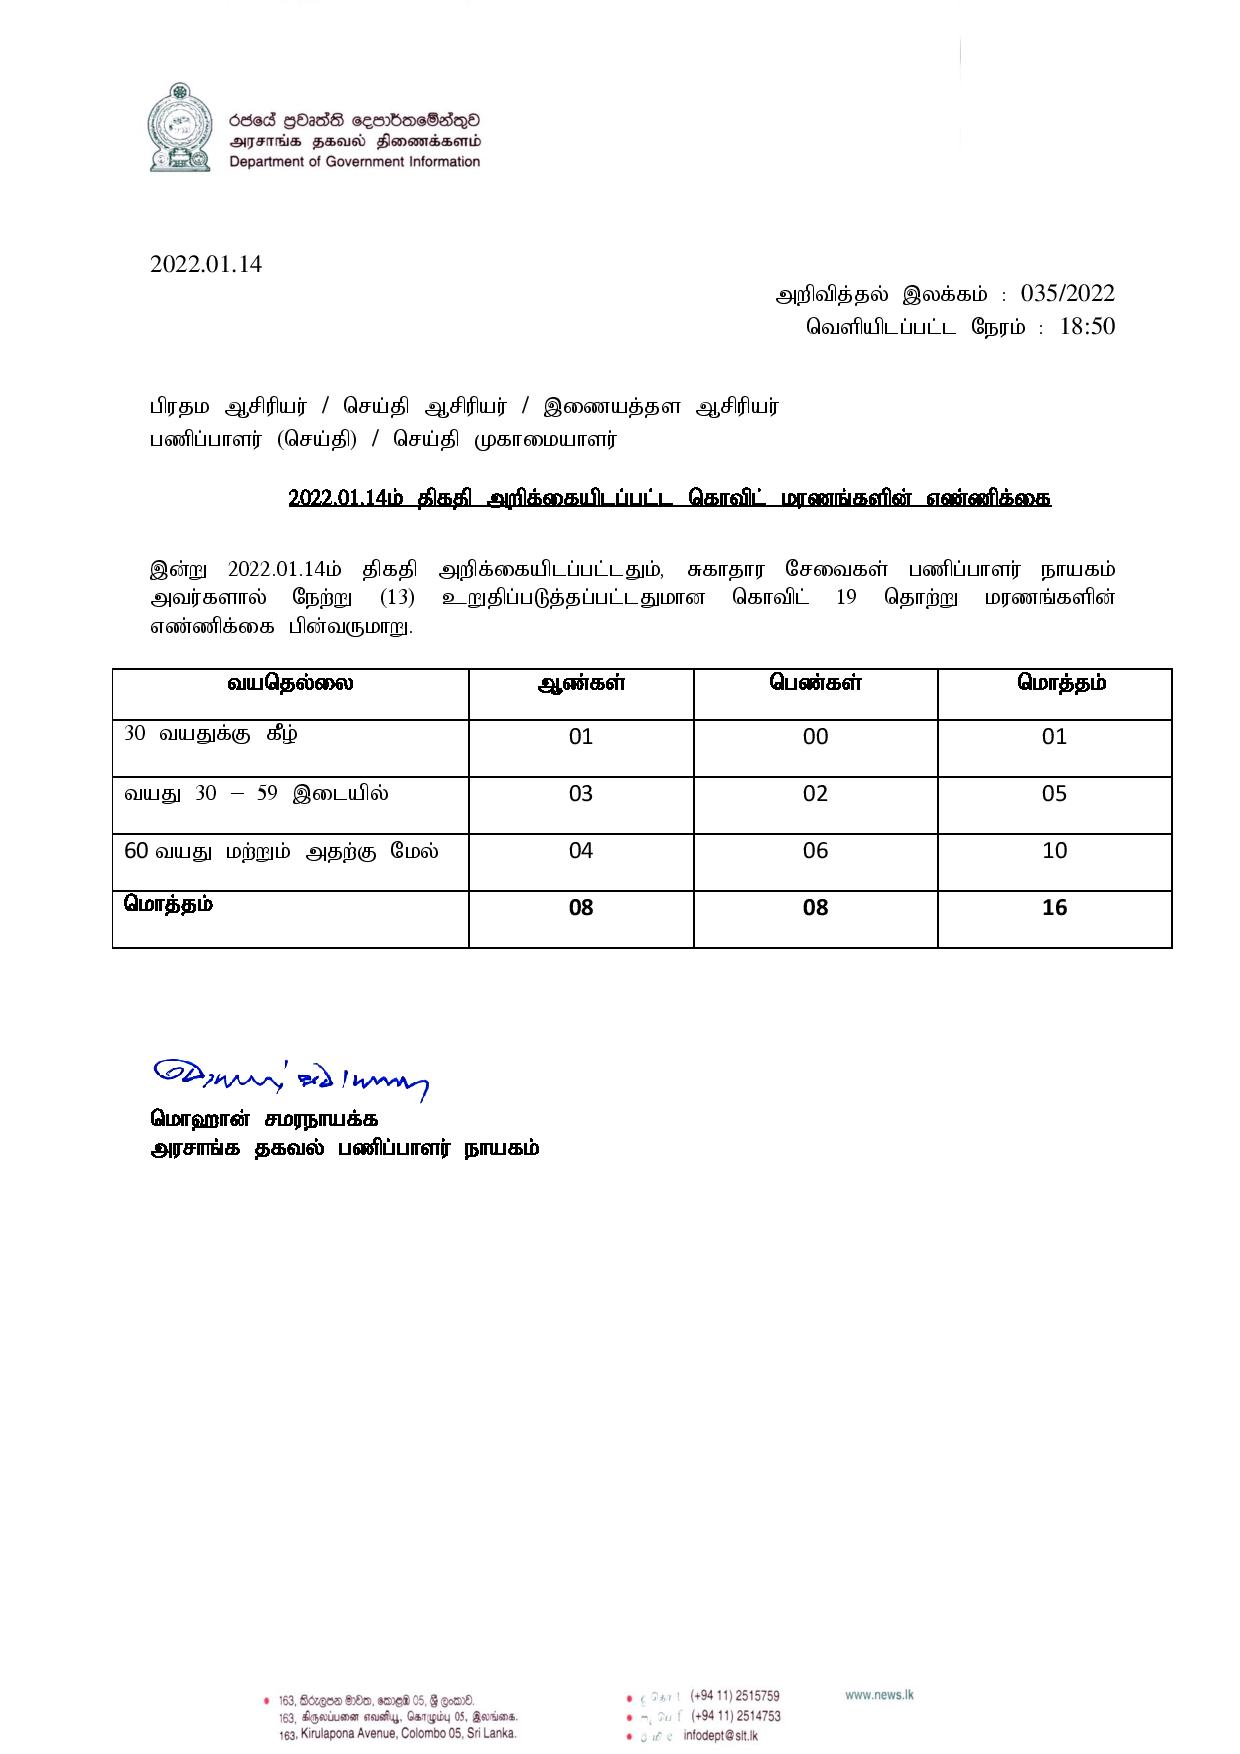 Press Release 35 Tamil page 001